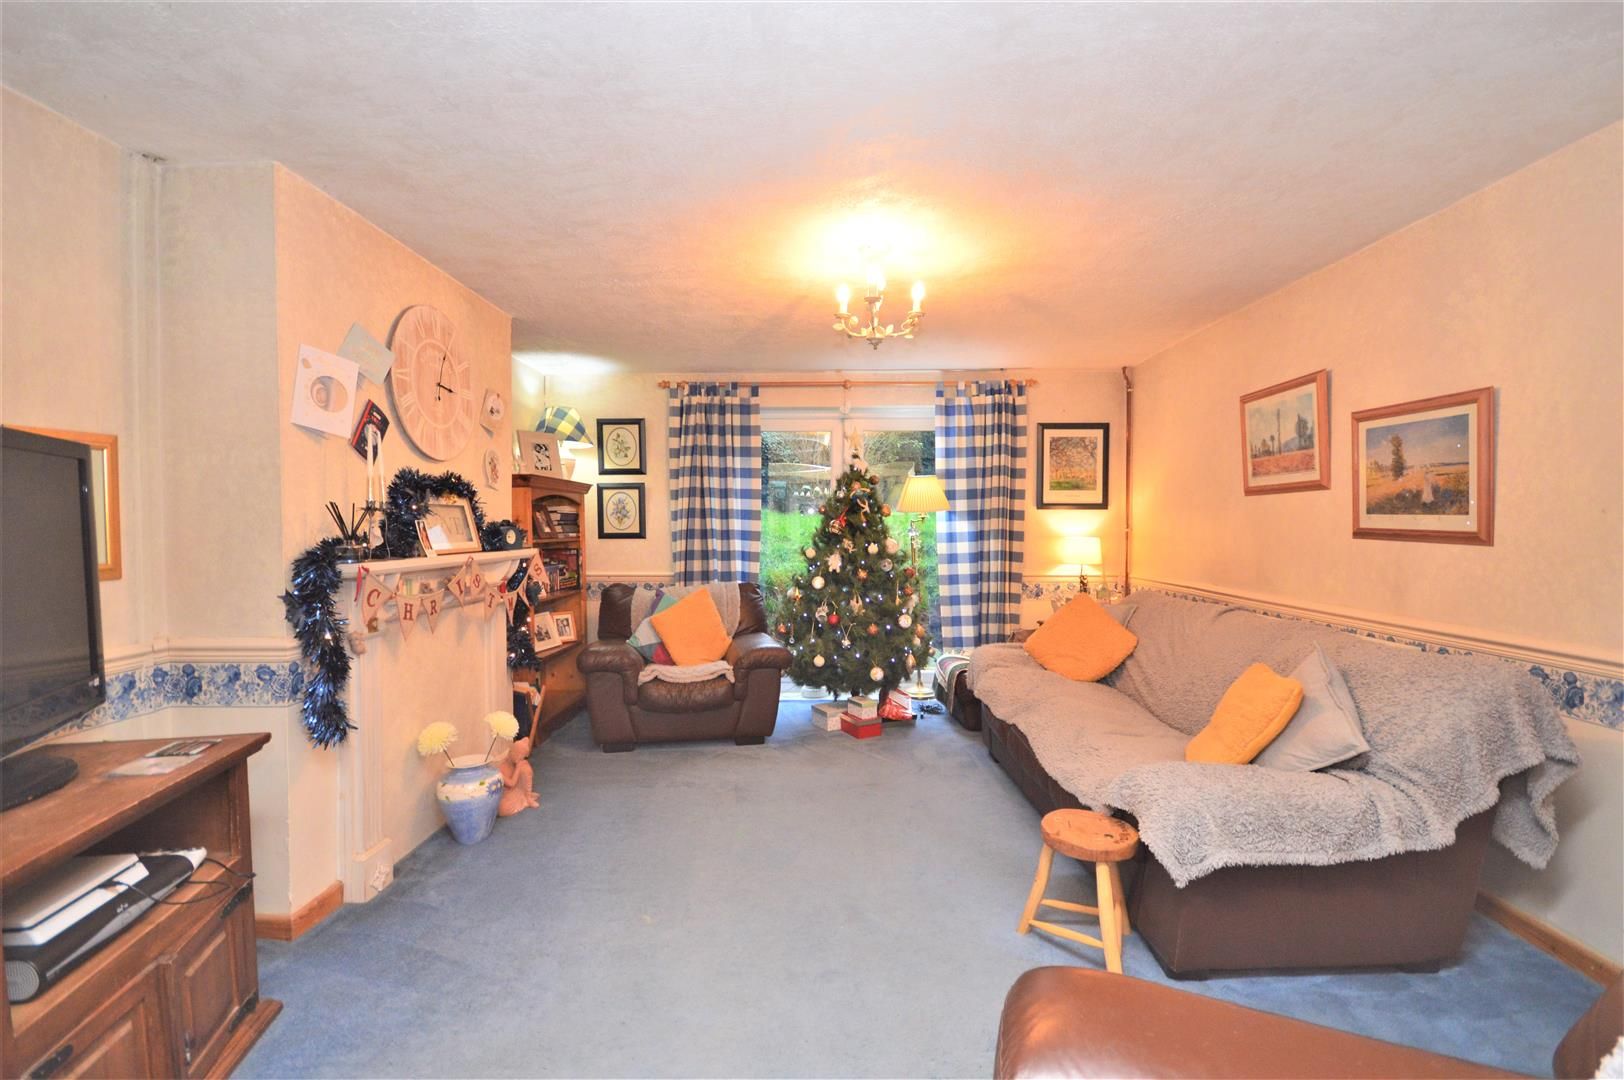 3 bed semi-detached for sale in Much Birch 6